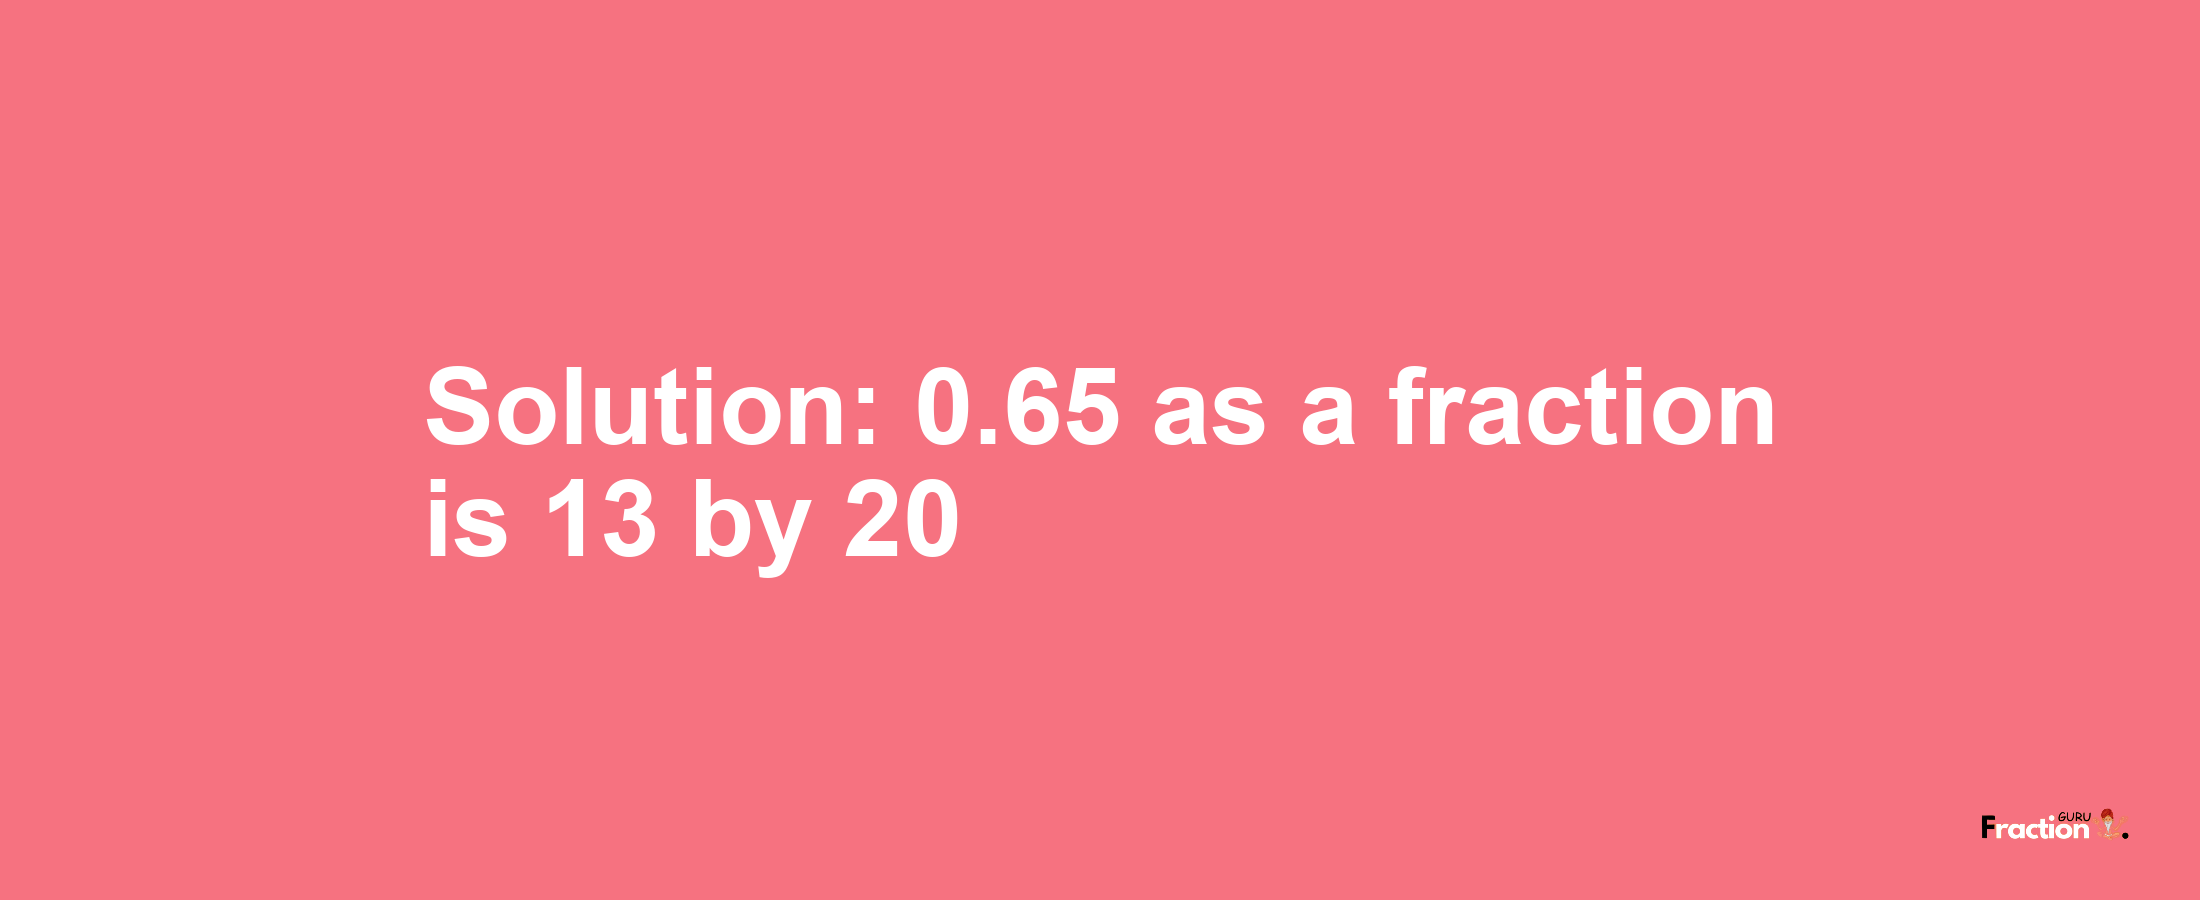 Solution:0.65 as a fraction is 13/20